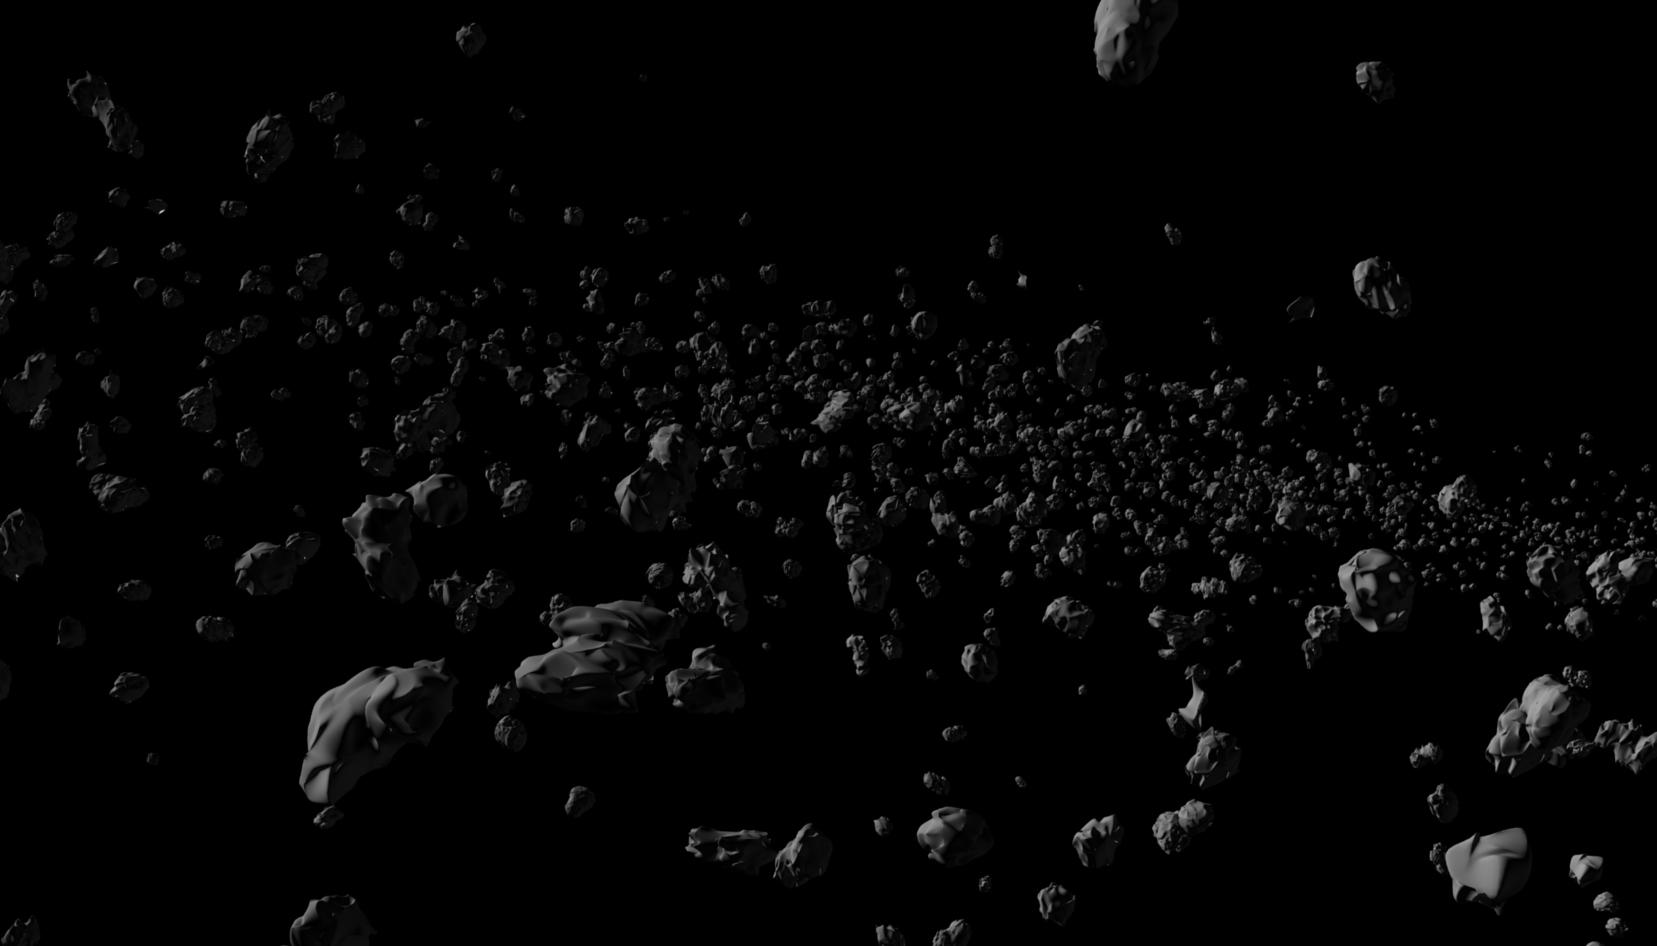 Asteroids: What they are and where they come from